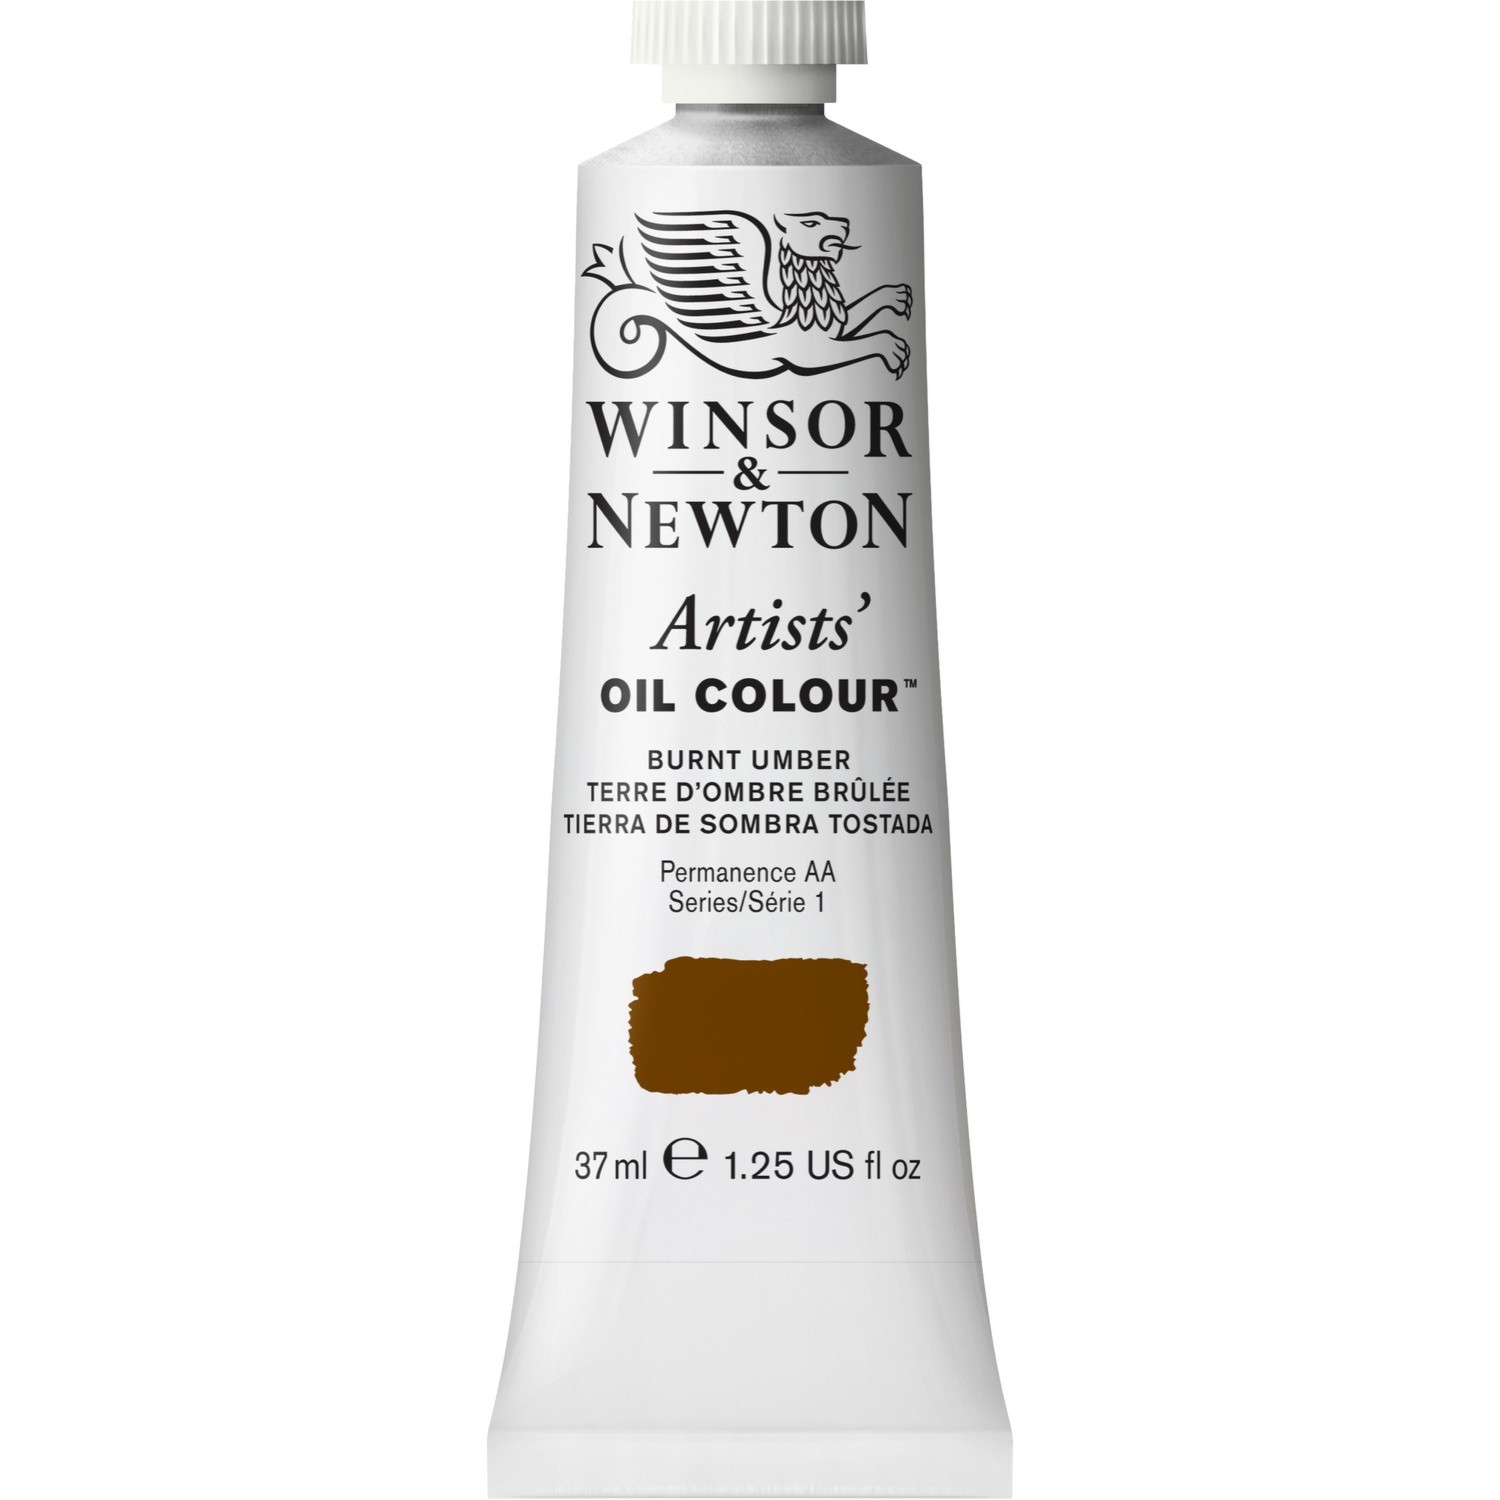 Winsor and Newton 37ml Artists' Oil Colours - Burnt Umber Image 1